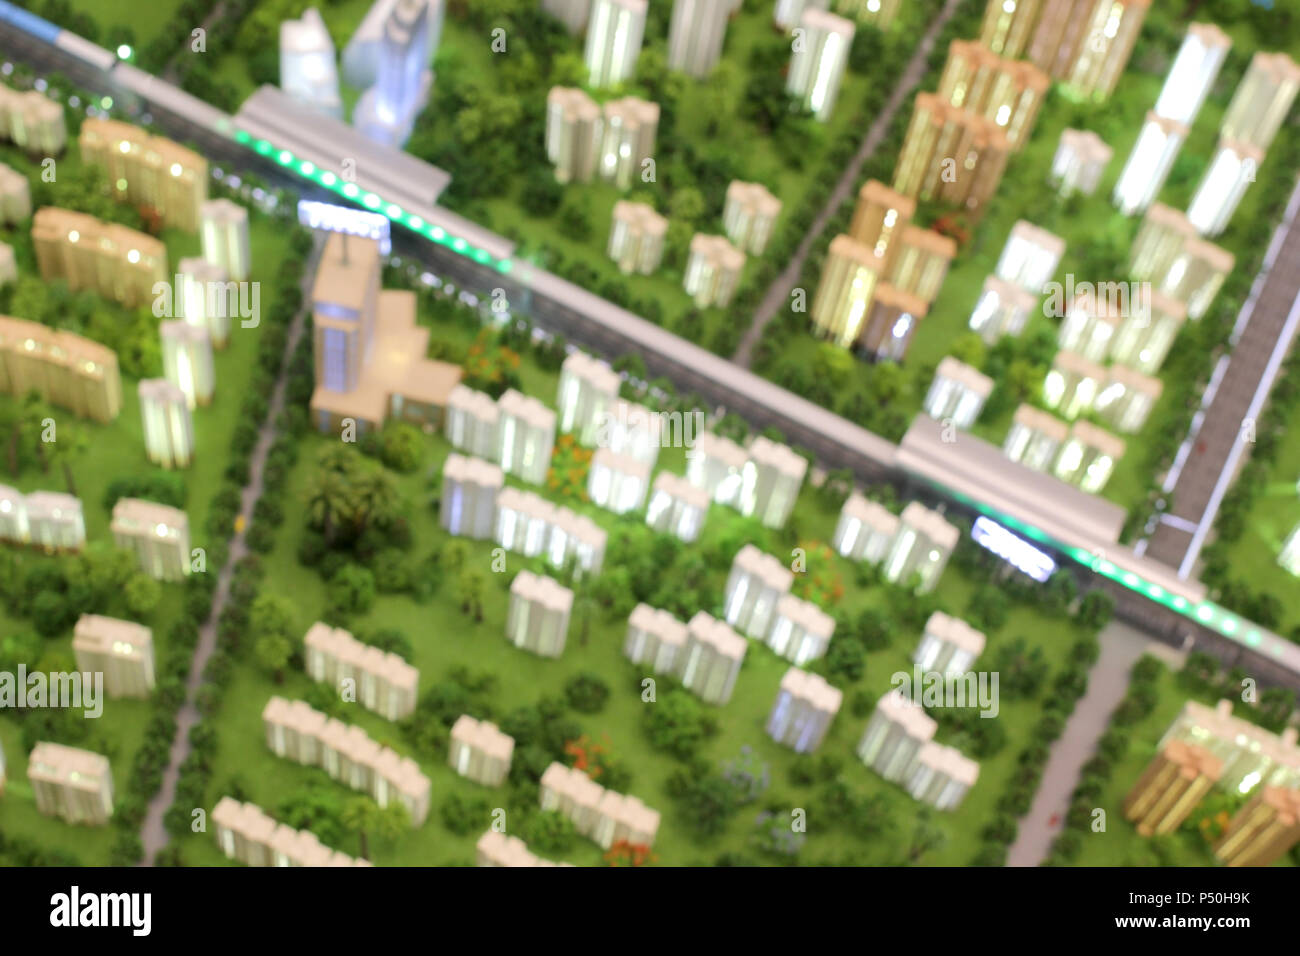 model of city, blurry picture of  isometric  modern city streets Stock Photo